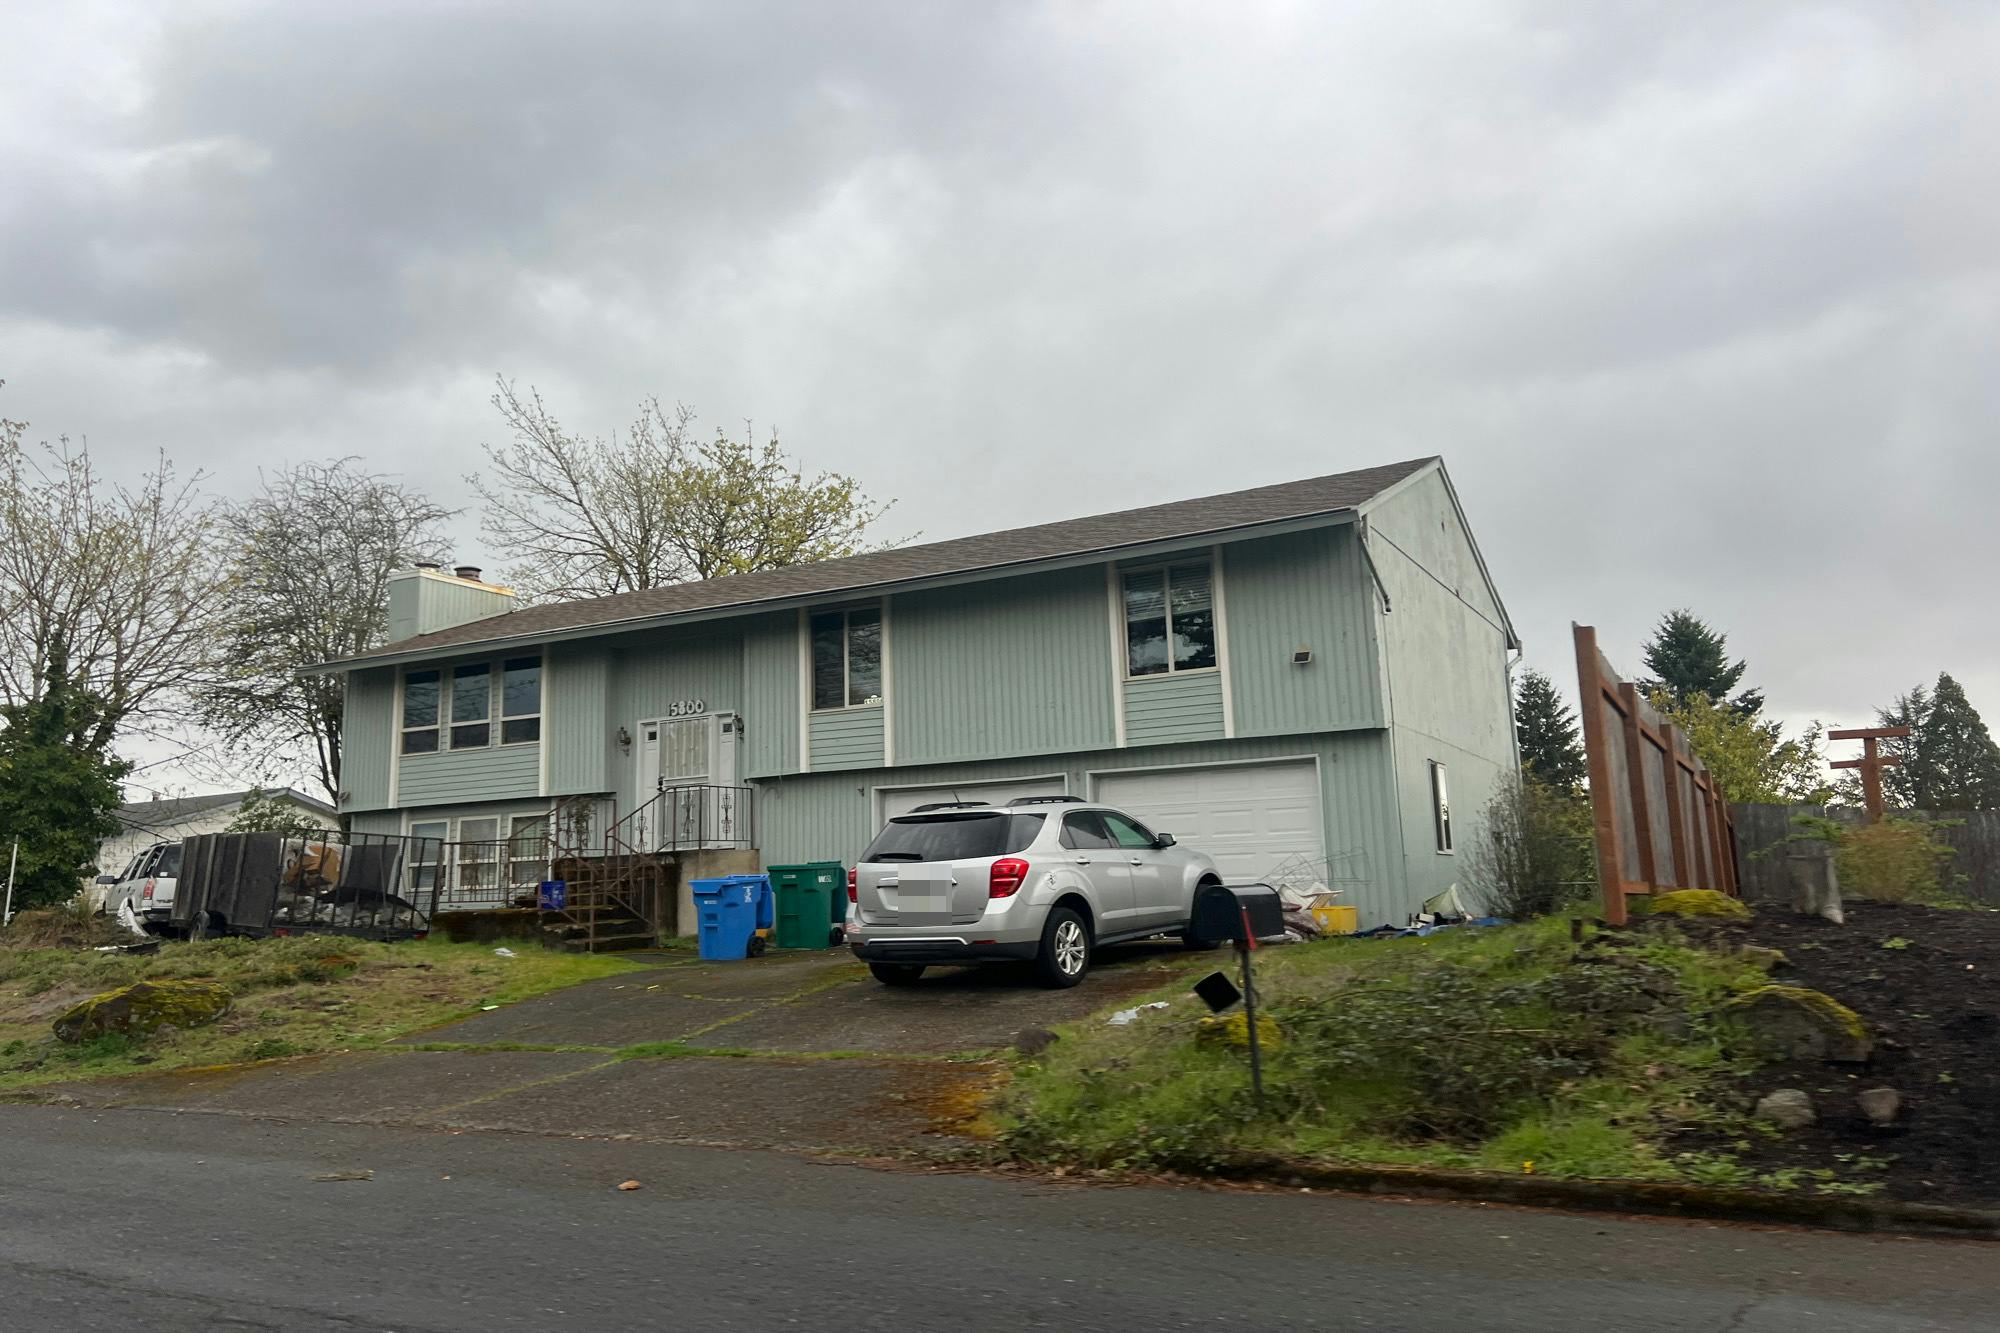 Wallace Rd, Milwaukie, OR 97267 #1